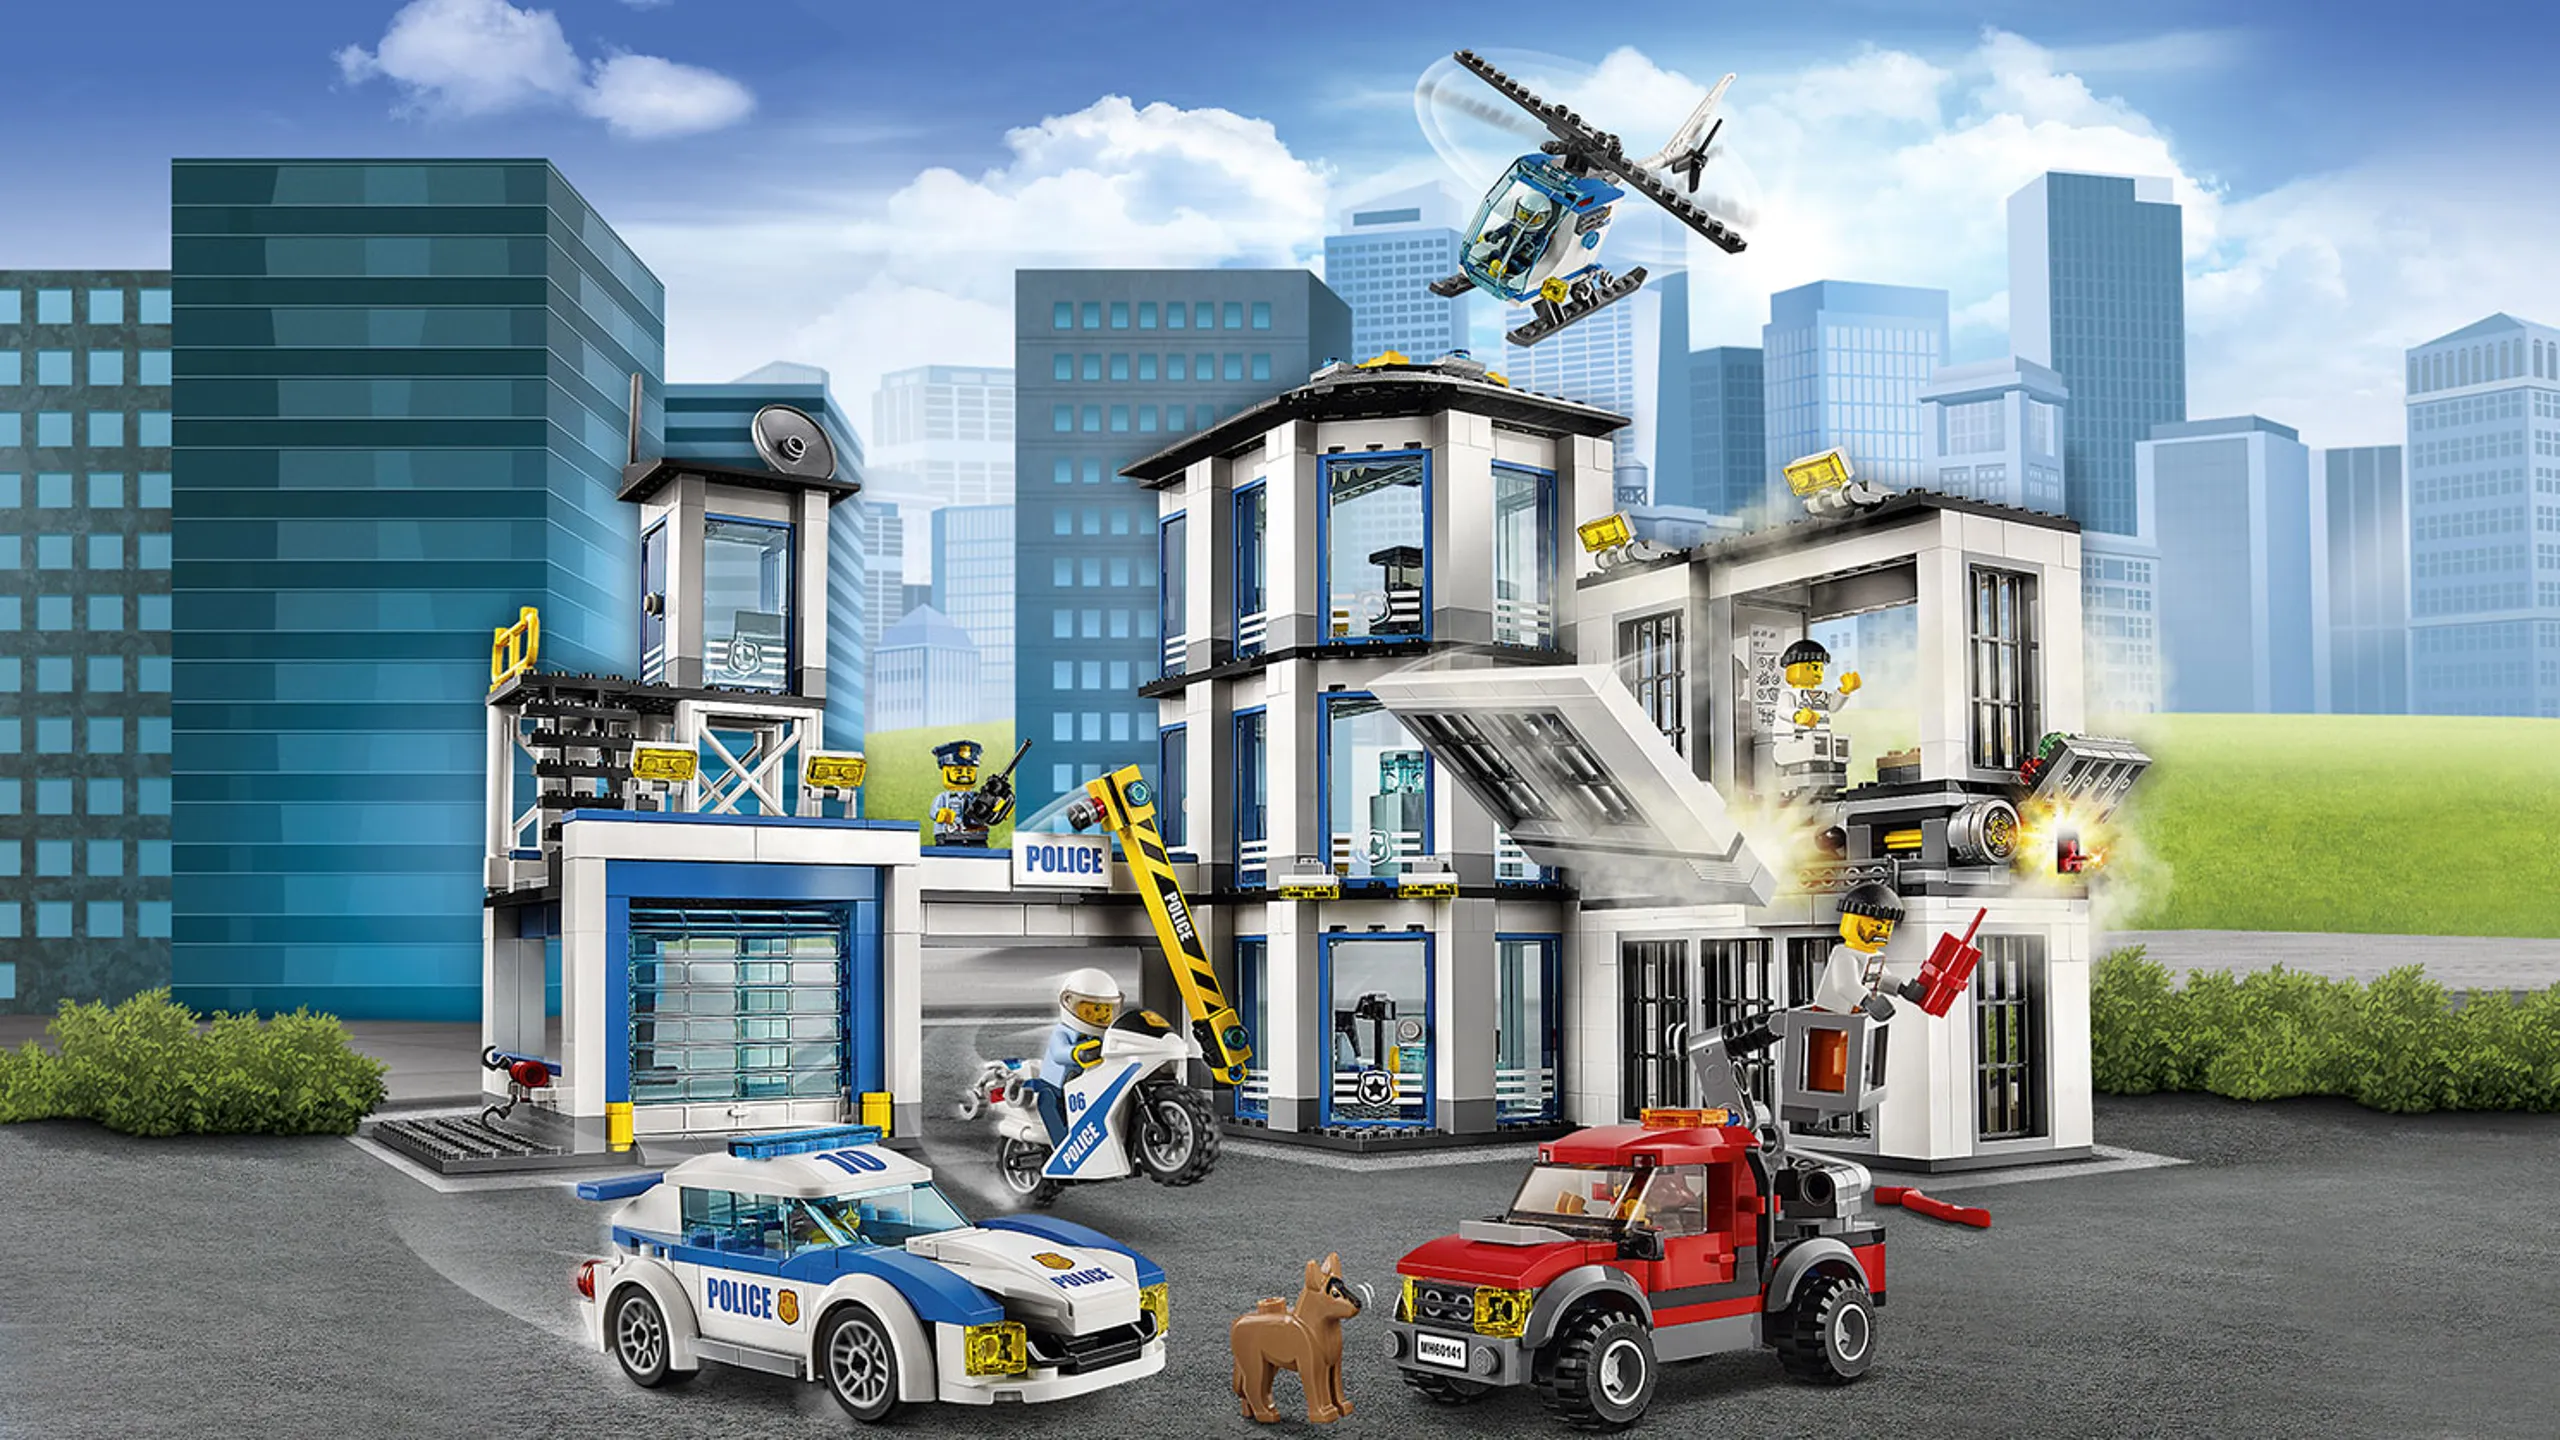 LEGO City Police - 60141 Police Station - The police's cars, motorbikes and helicopter is based at the police station where crooks are in prison cells and trying to escape.